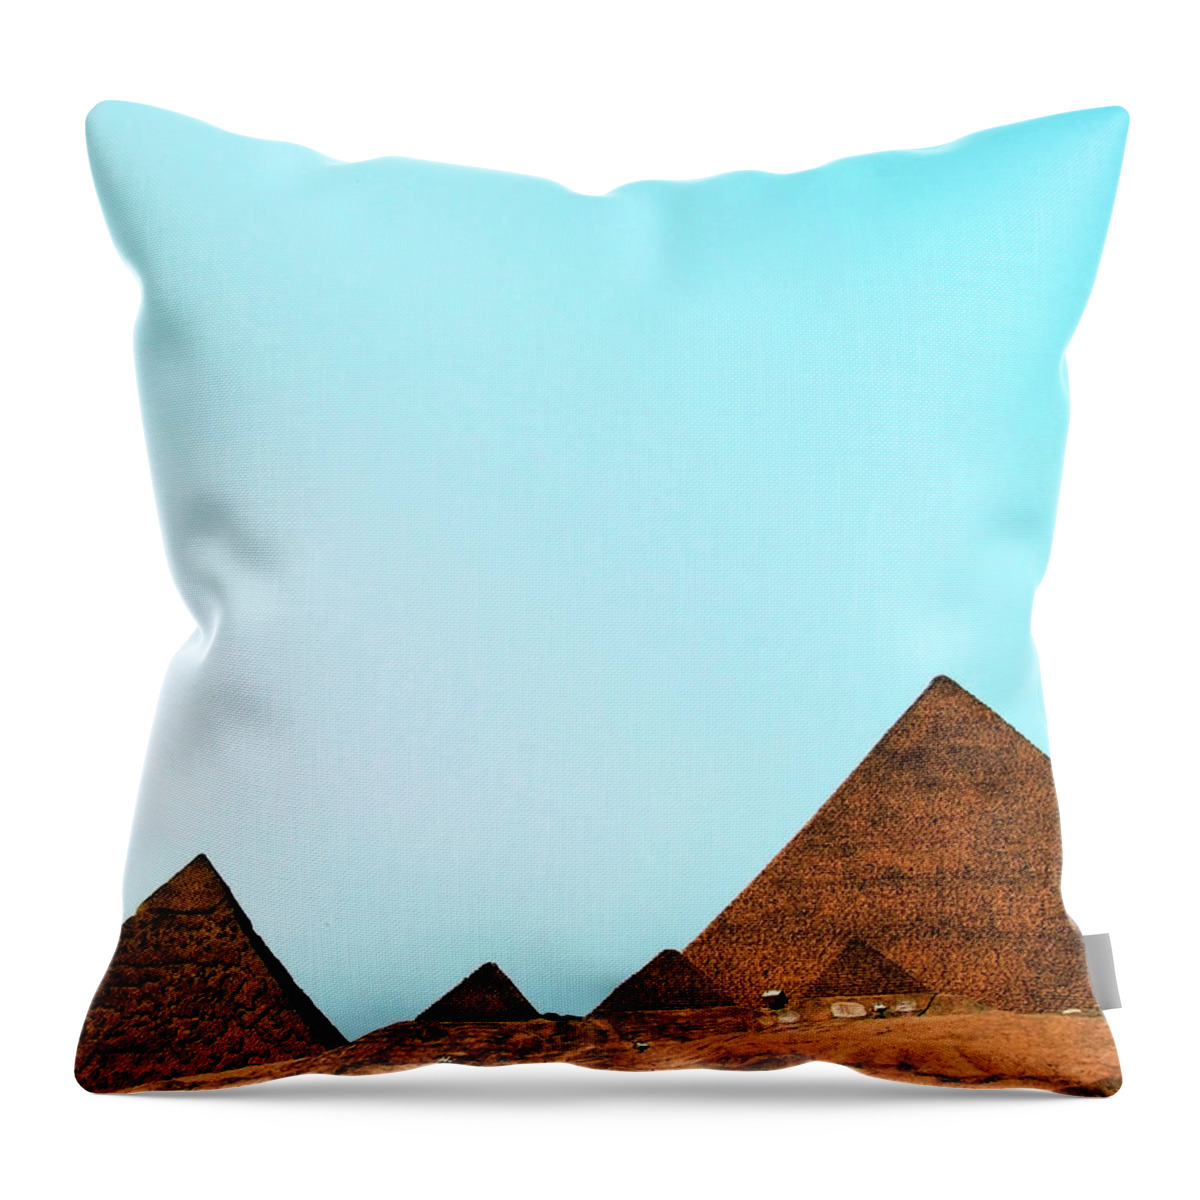 Tranquility Throw Pillow featuring the photograph Replica Of The Great Pyramid Of Giza by Nora Carol Photography